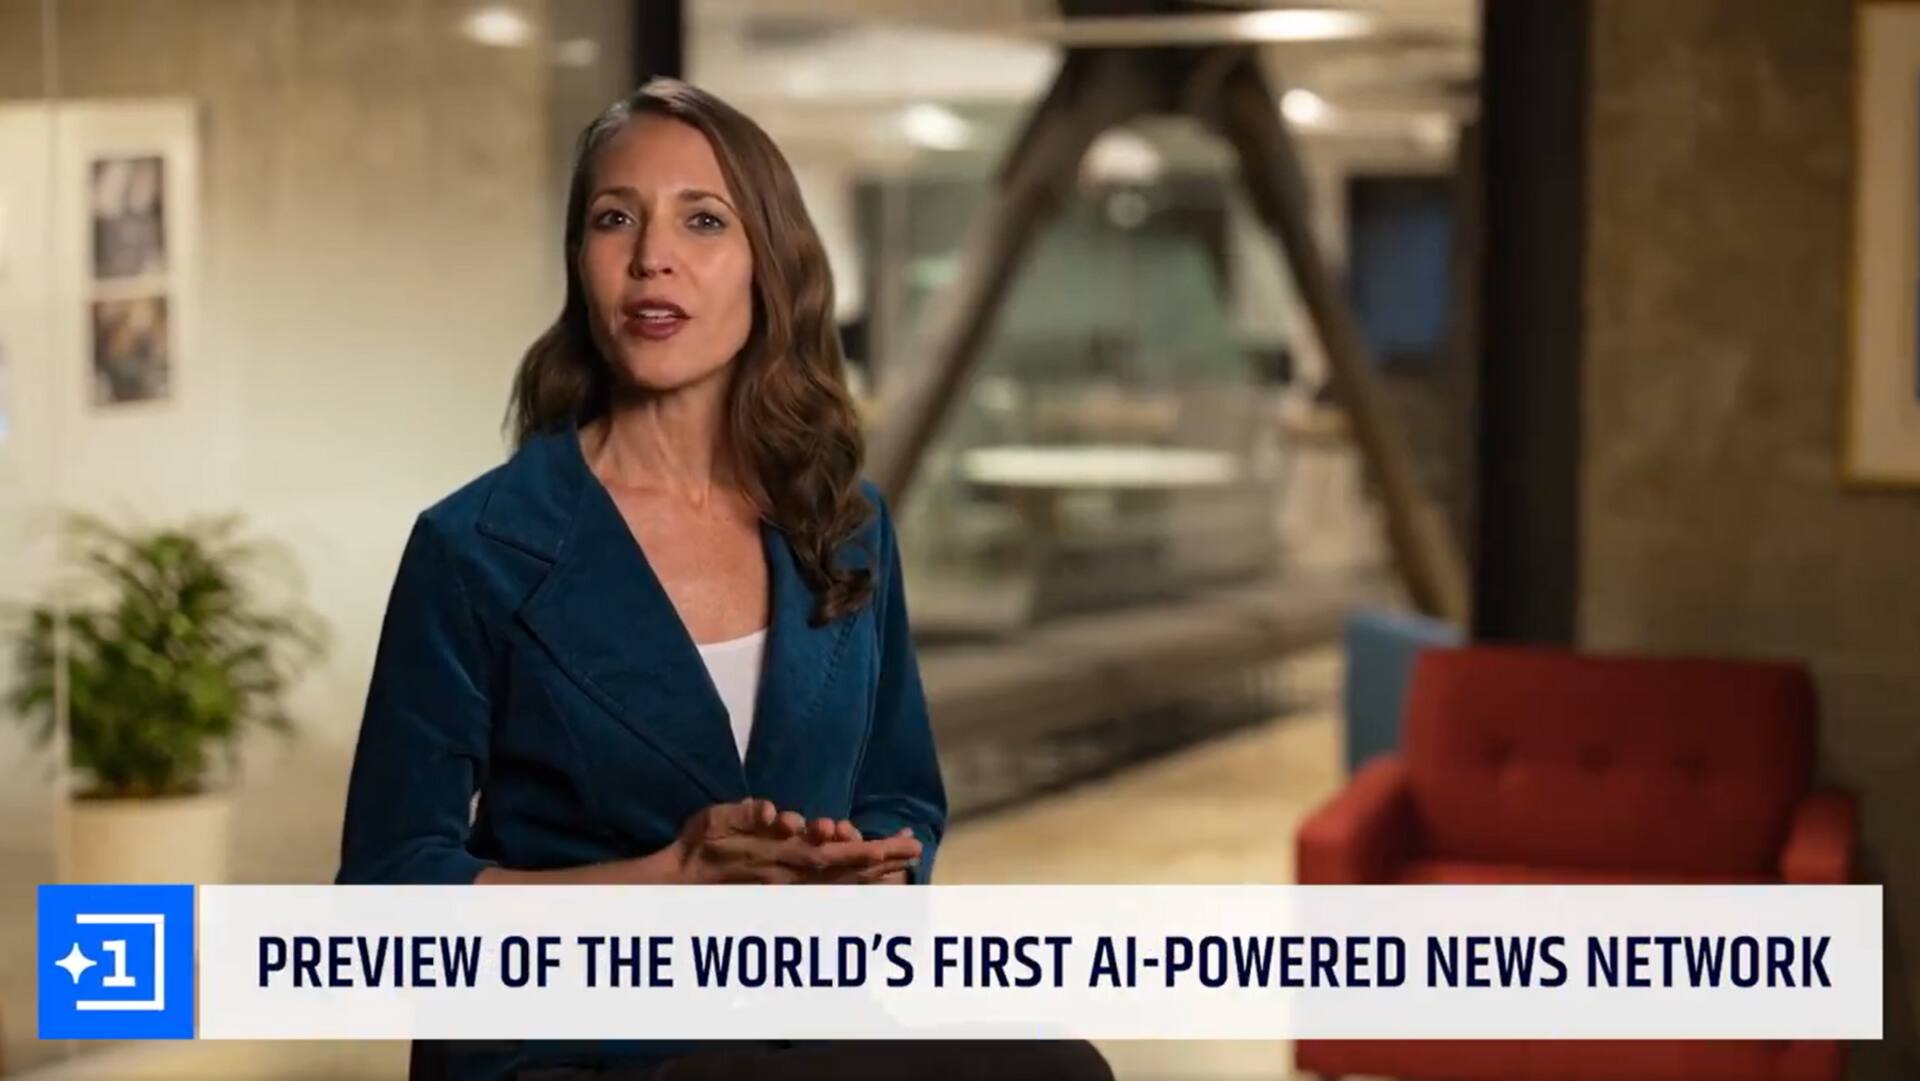 Watch: Channel 1's newscast demo impresses with AI-generated anchors